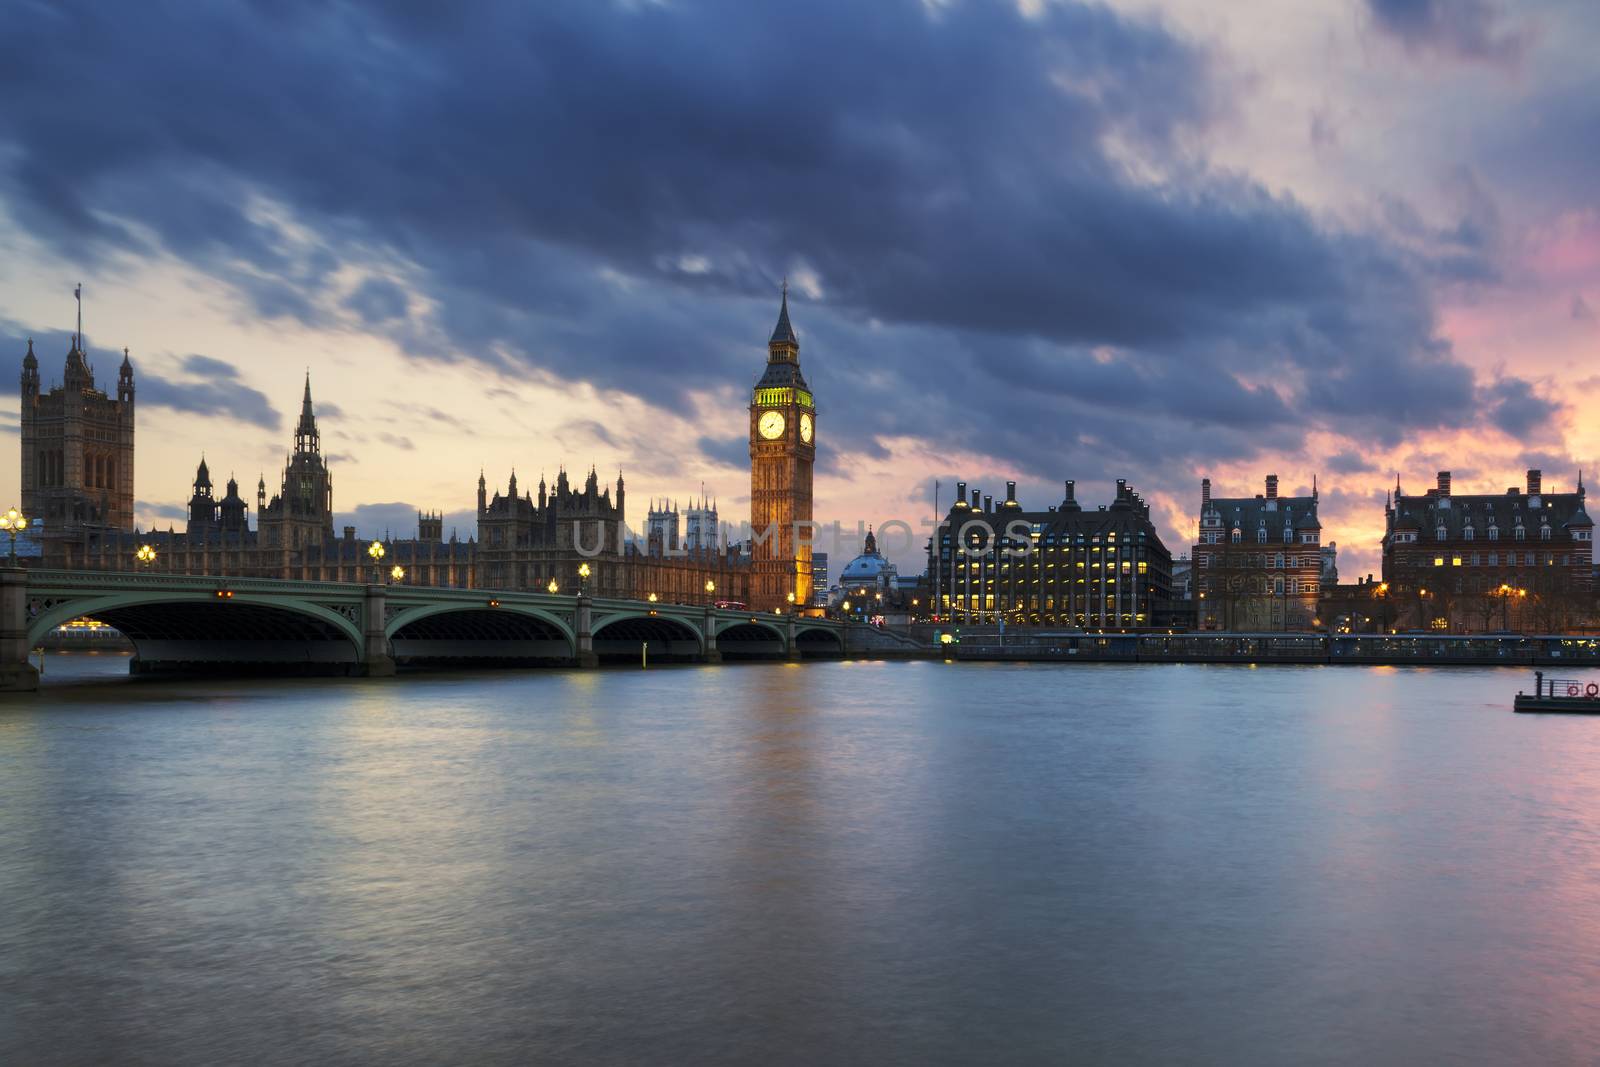 Big Ben clock tower in London at sunset by vwalakte